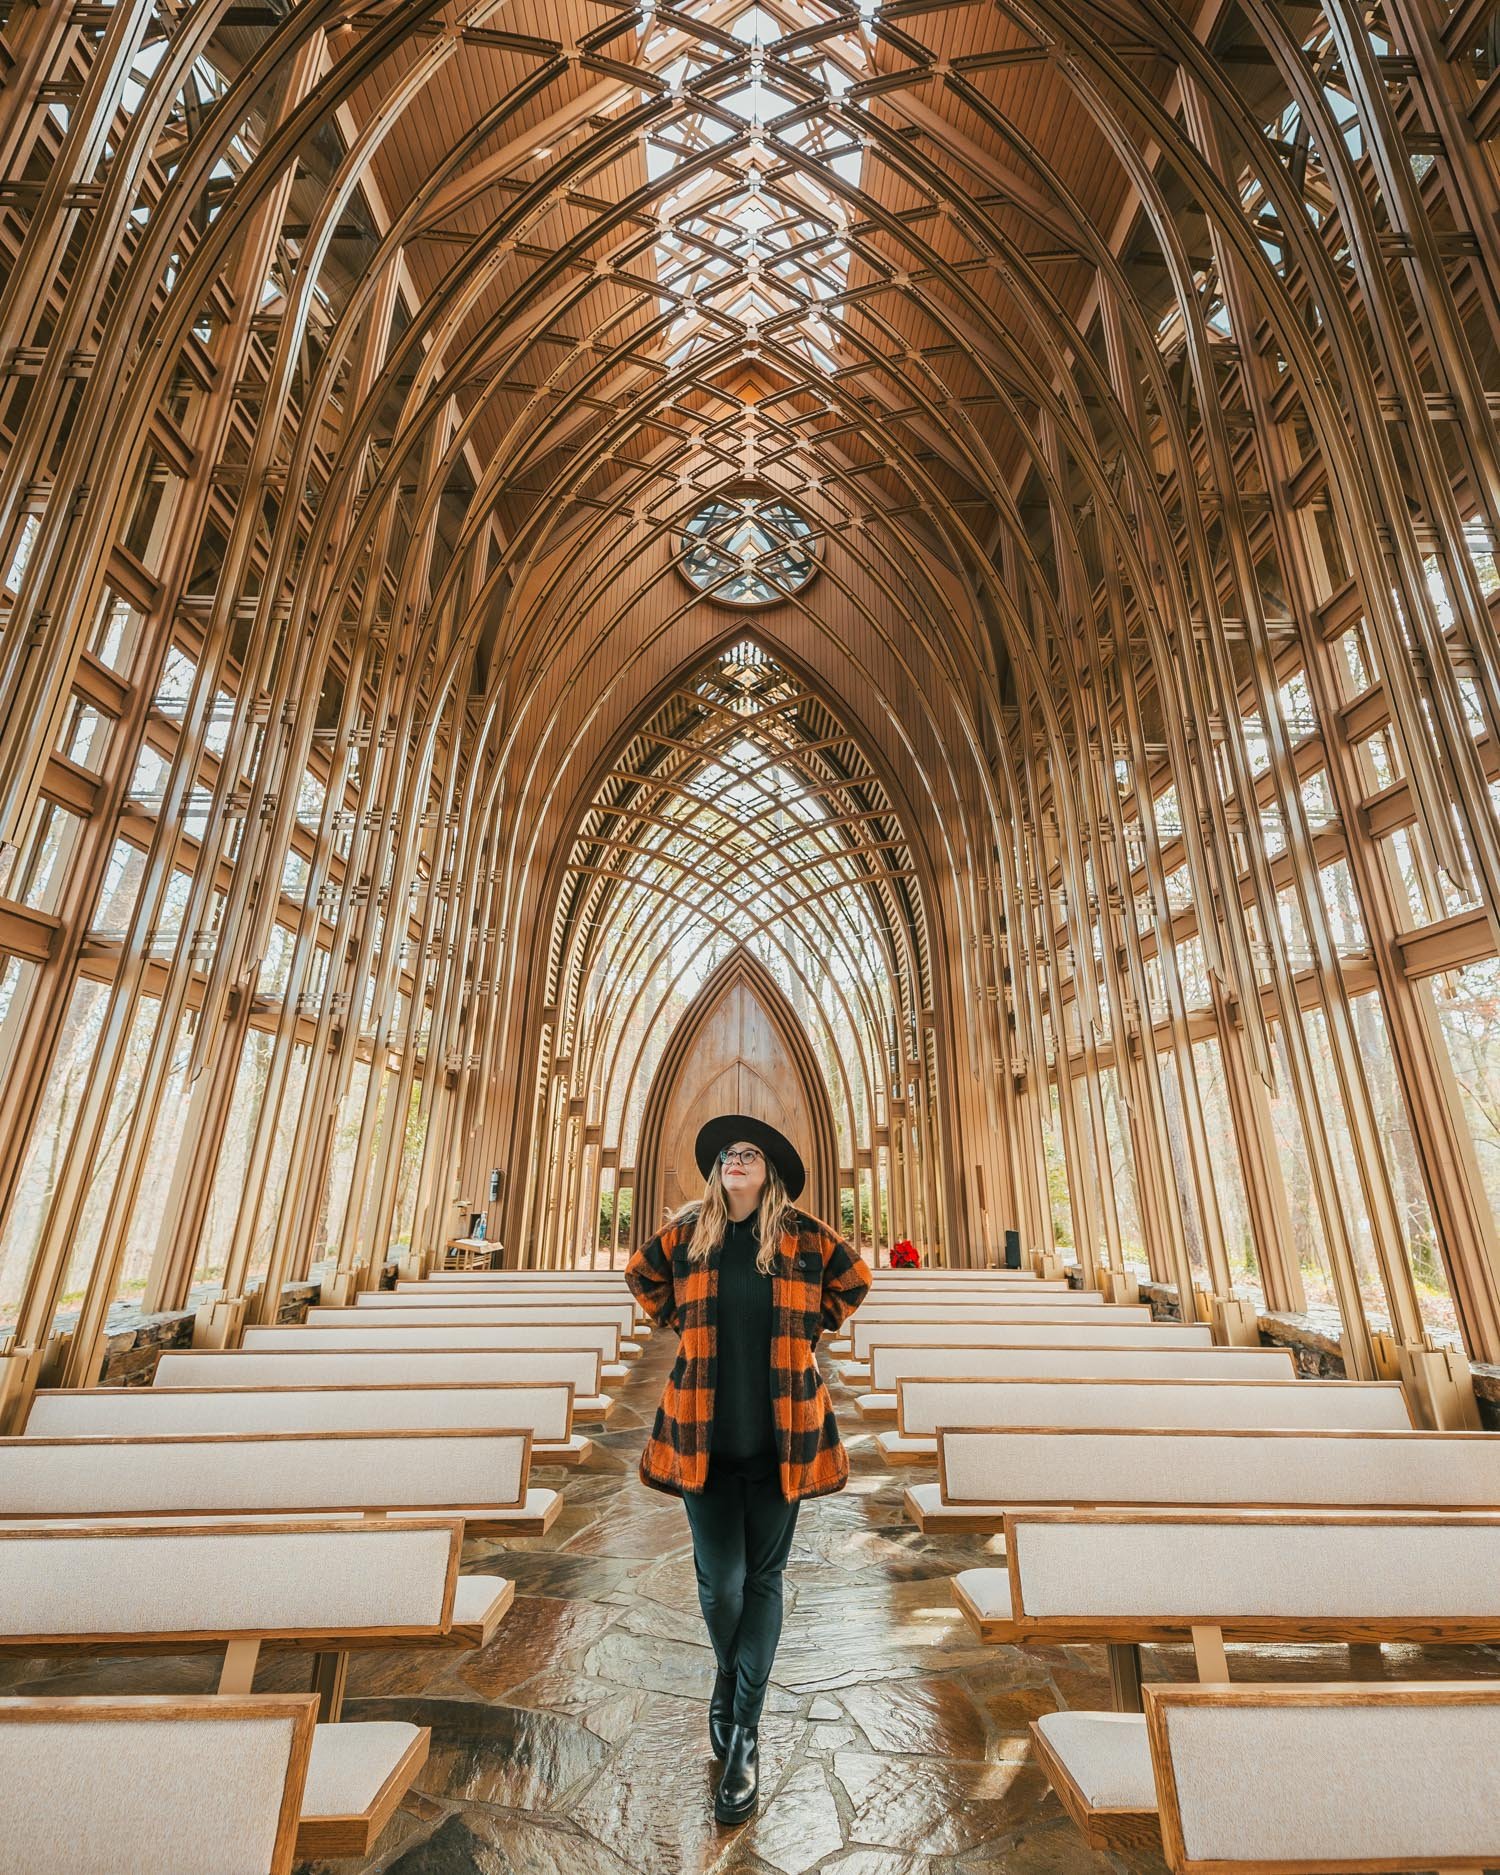 The Best Things to Do in Northwest Arkansas // Mildred B. Cooper Memorial Chapel in Bella Vista by E. Fay Jones